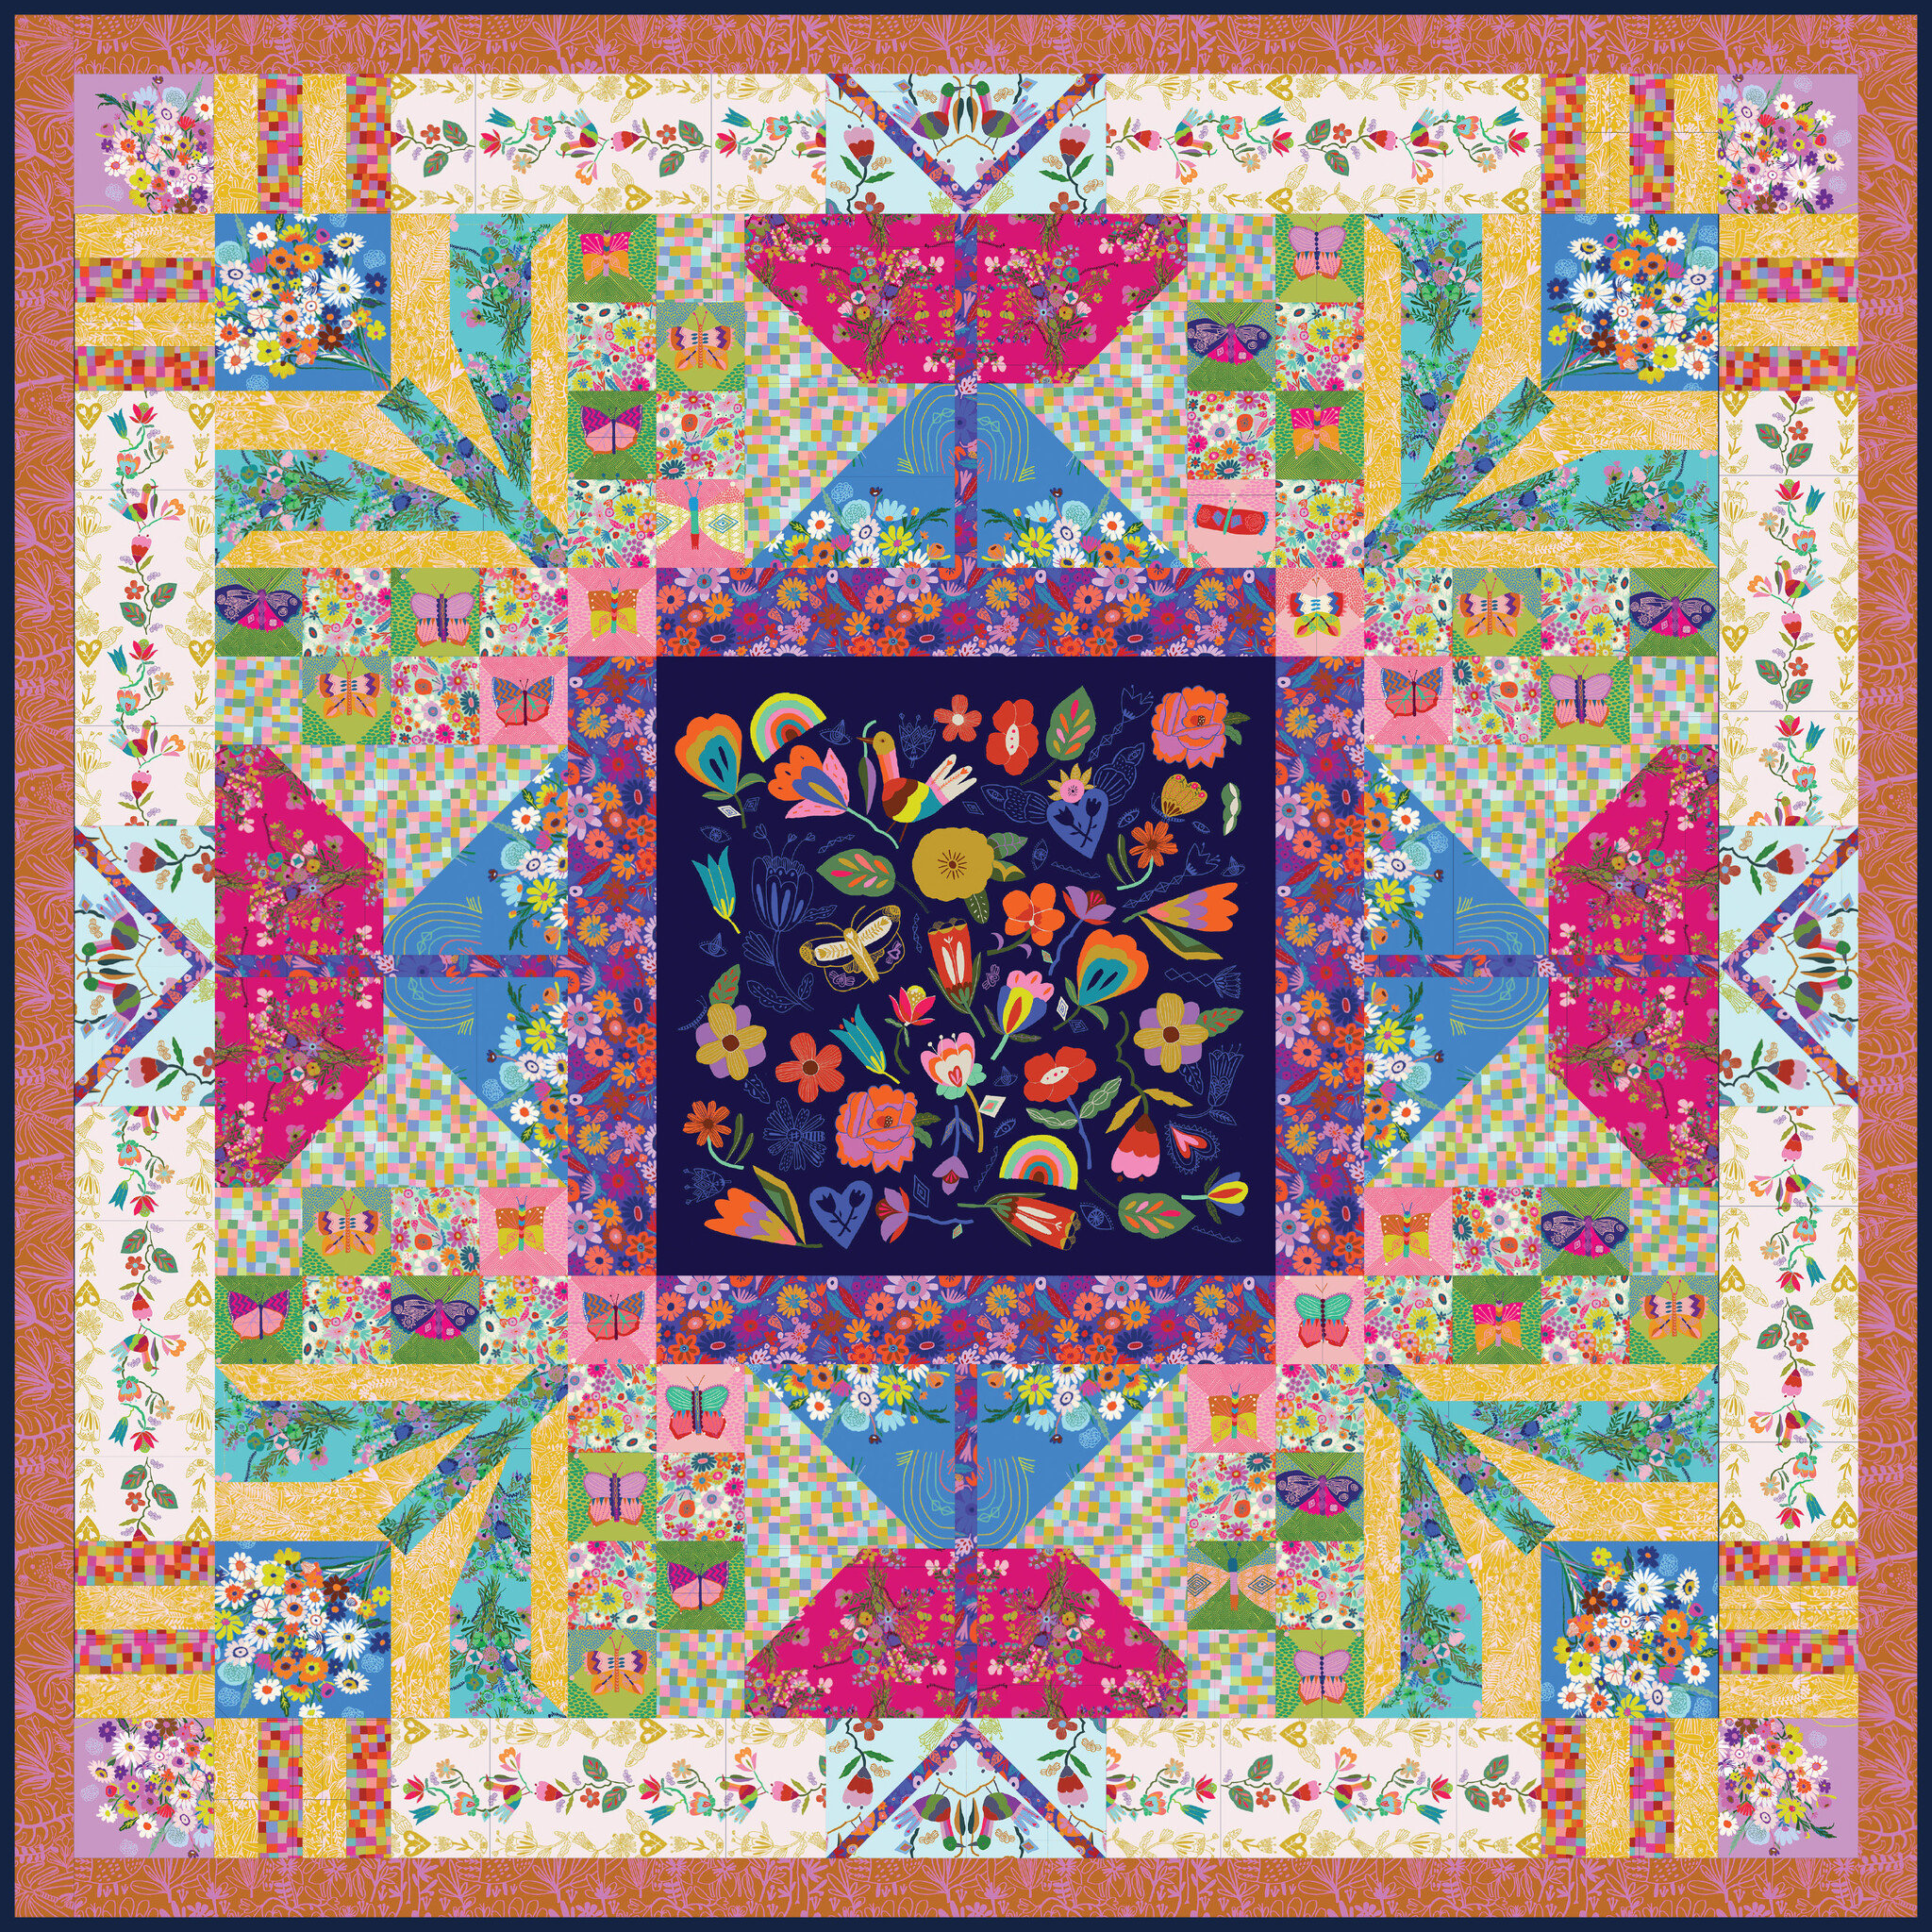 Harmony Quilt Featuring Harmony by Carolyn Gavin for Conservatory Craft